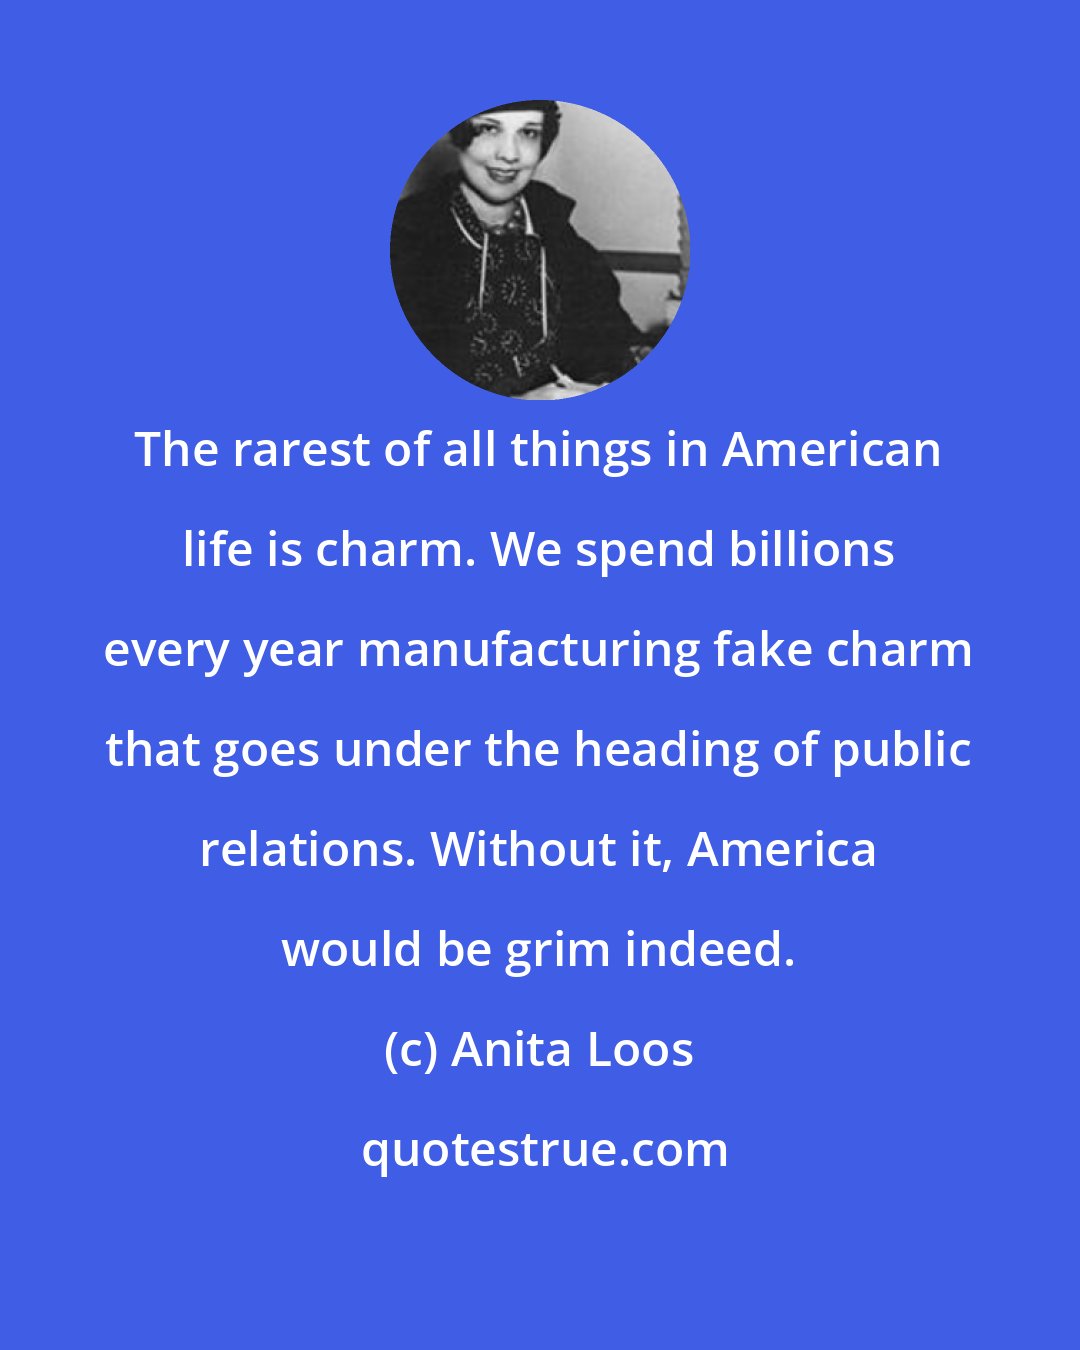 Anita Loos: The rarest of all things in American life is charm. We spend billions every year manufacturing fake charm that goes under the heading of public relations. Without it, America would be grim indeed.